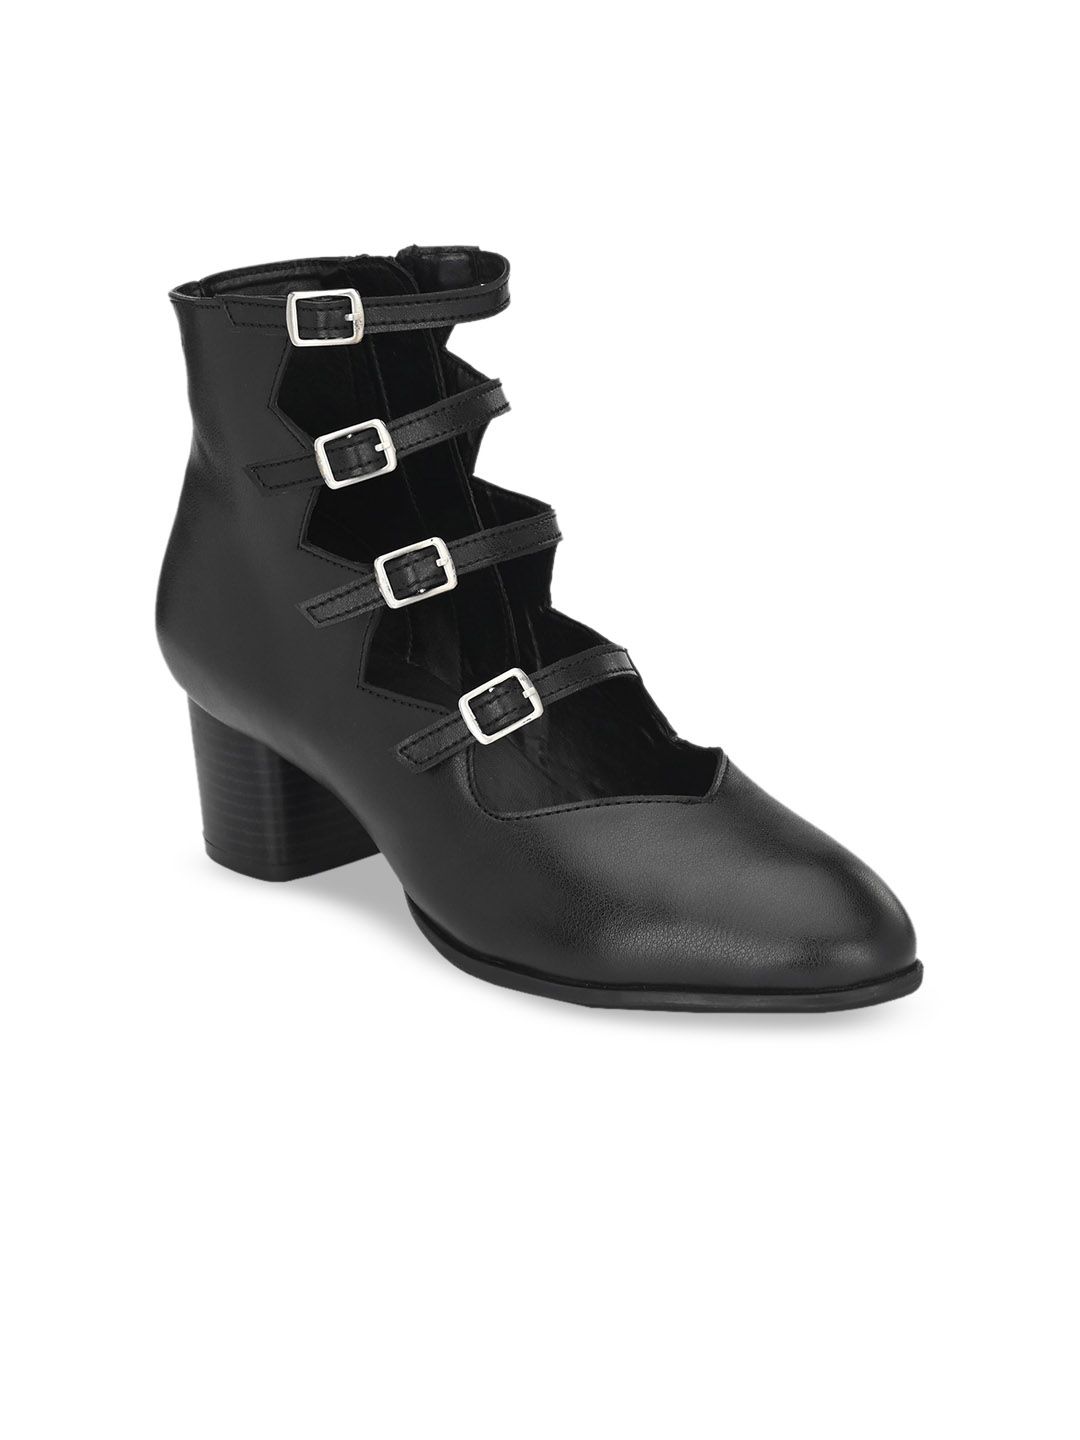 Delize Women Black Solid Mid-Top Heeled Boots Price in India